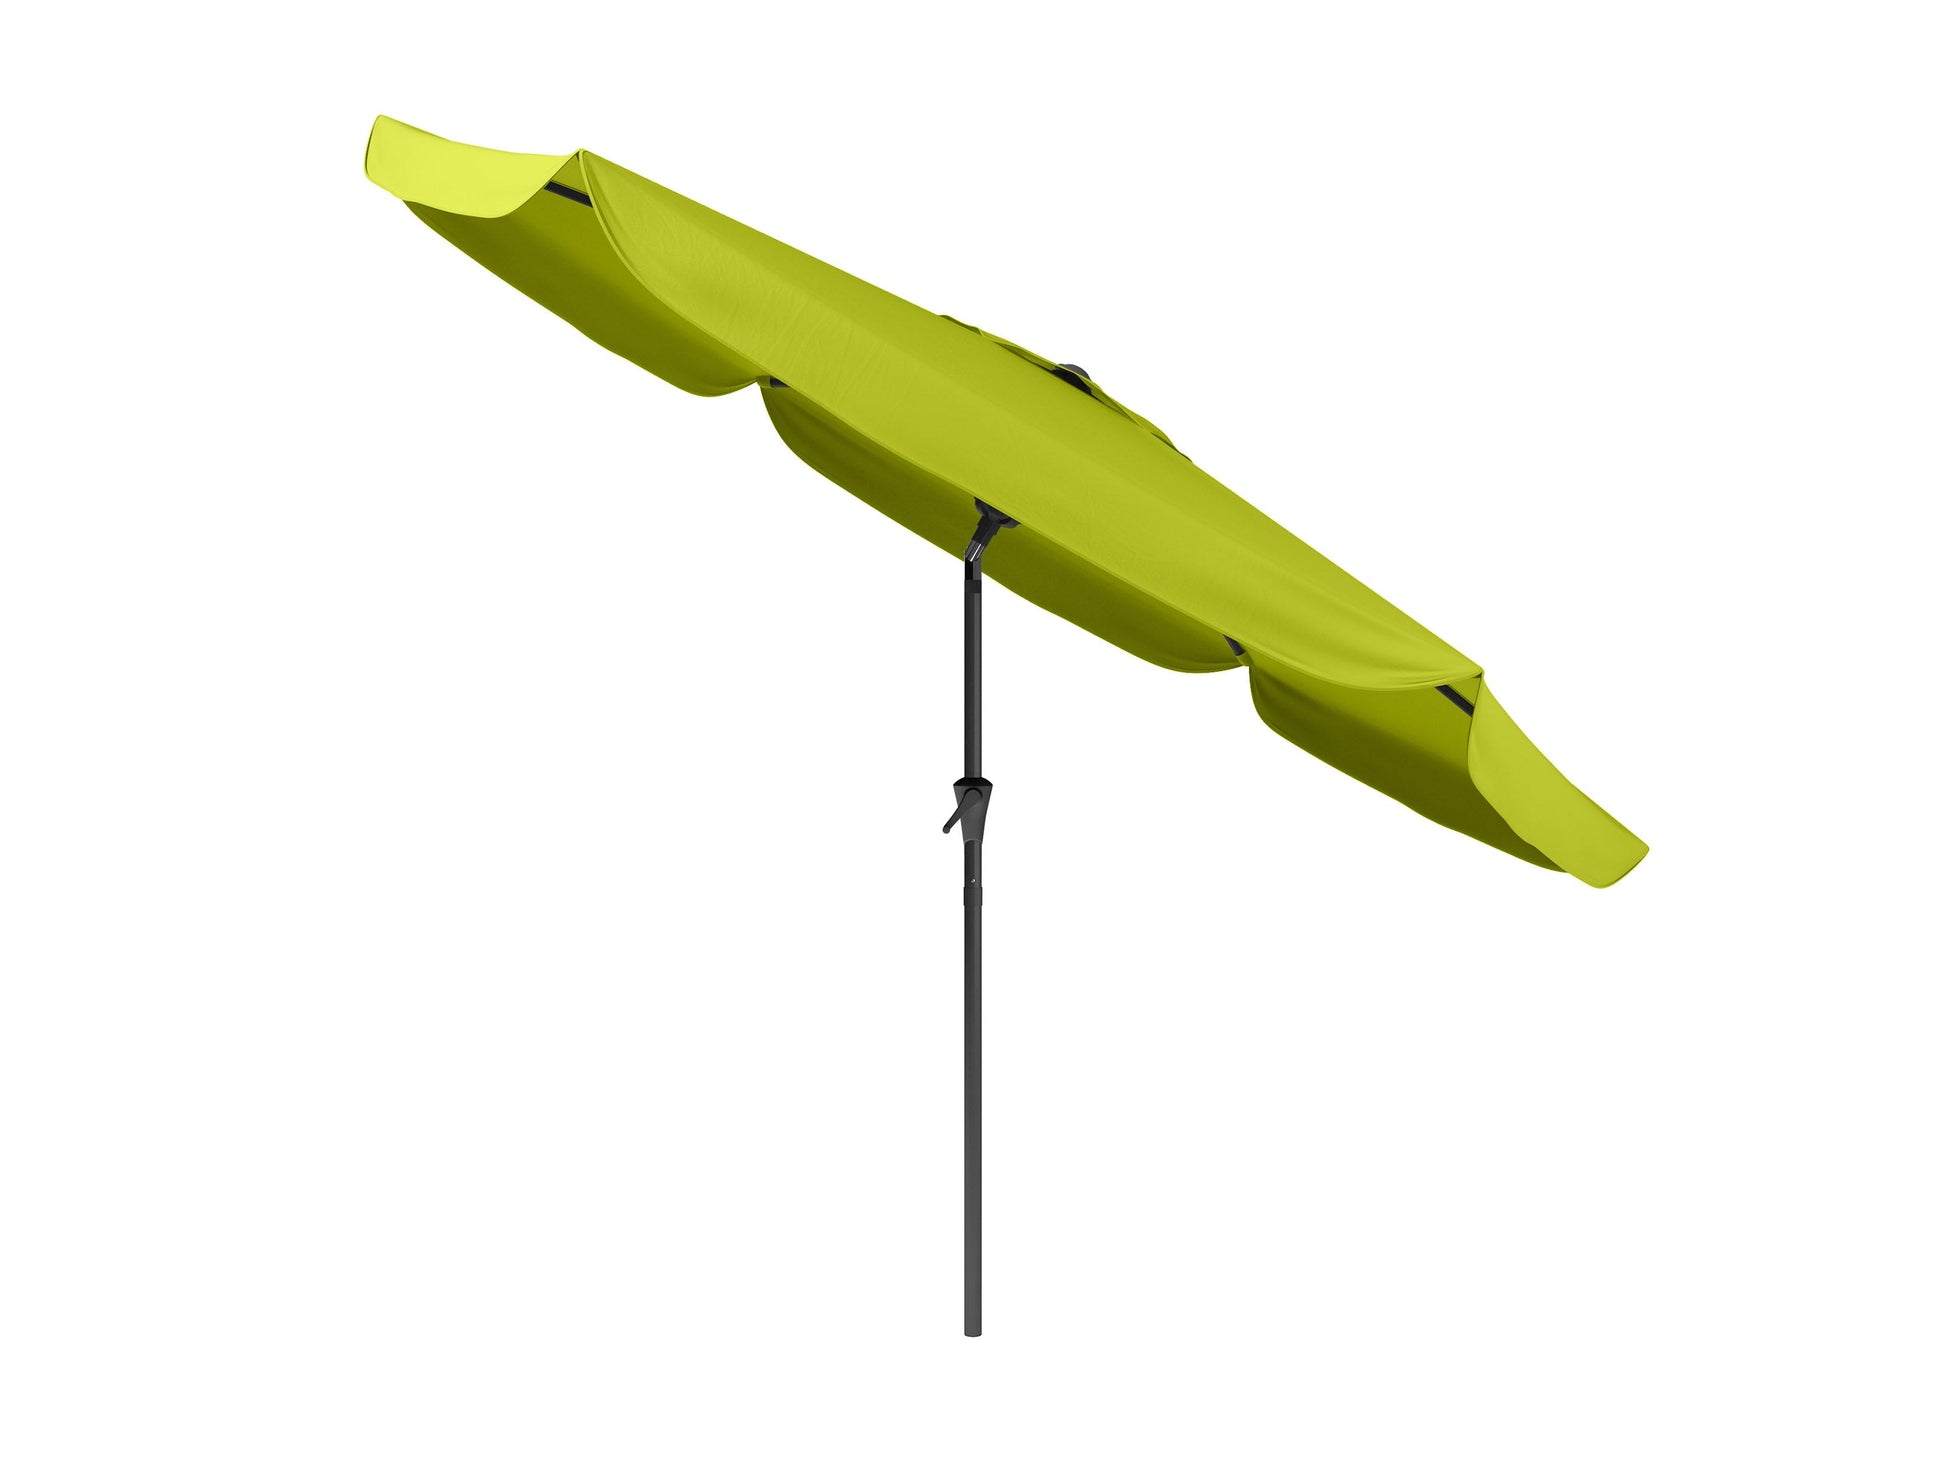 lime green 10ft patio umbrella, round tilting 200 Series product image CorLiving#color_lime-green